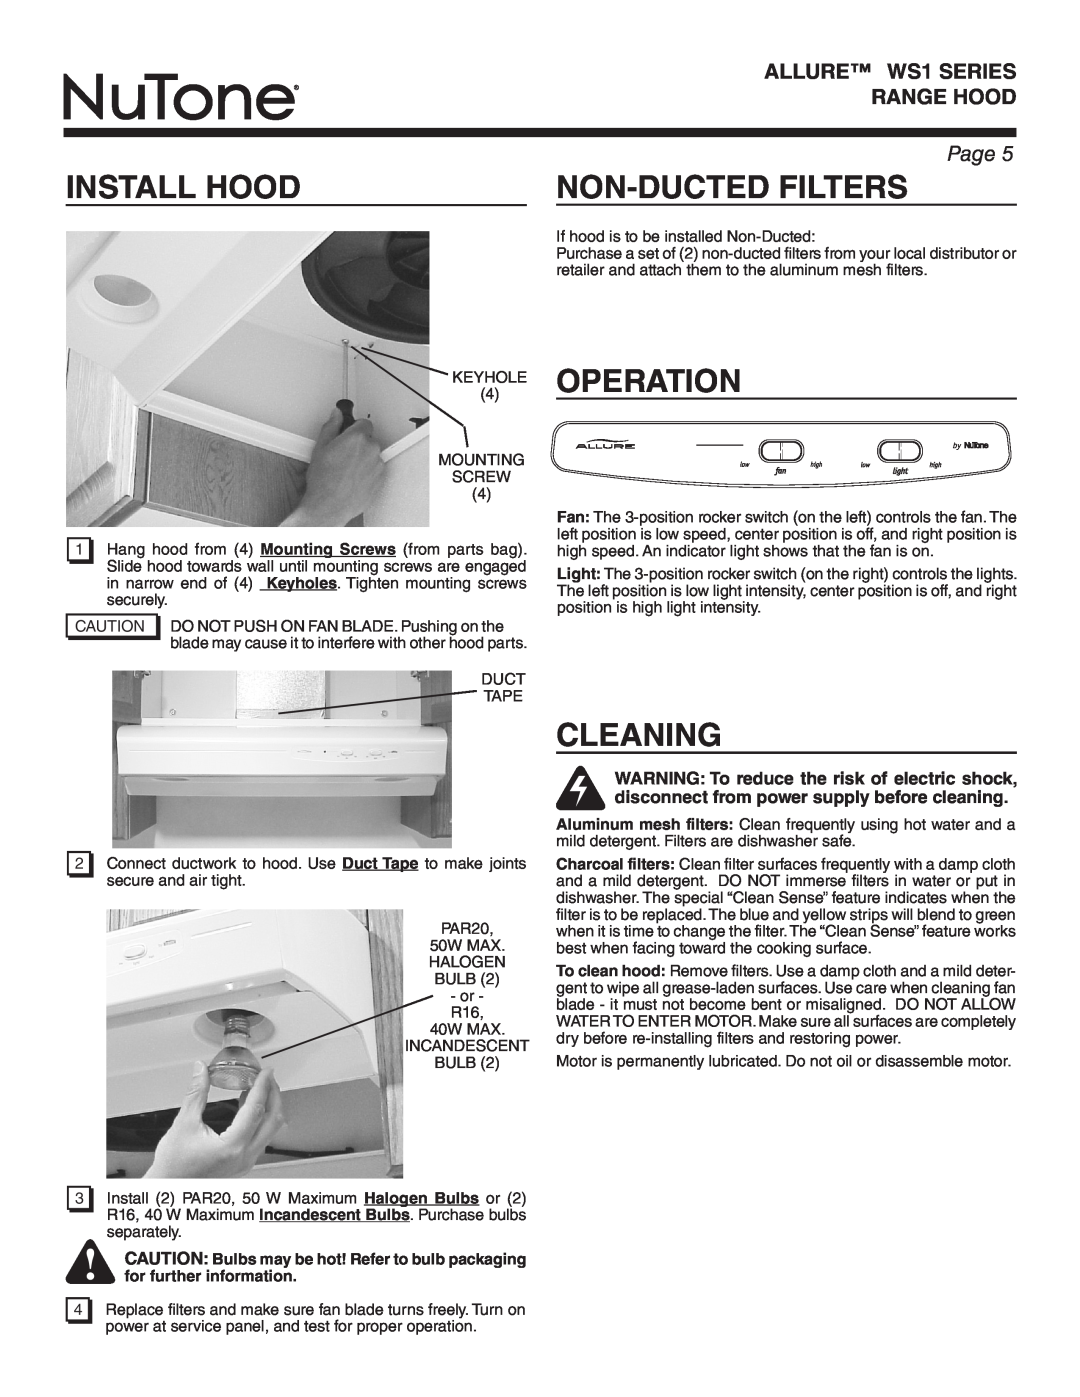 NuTone WS130AA, WS1 SERIES warranty Install Hood, Non-Ducted Filters, Operation, Cleaning, Page 